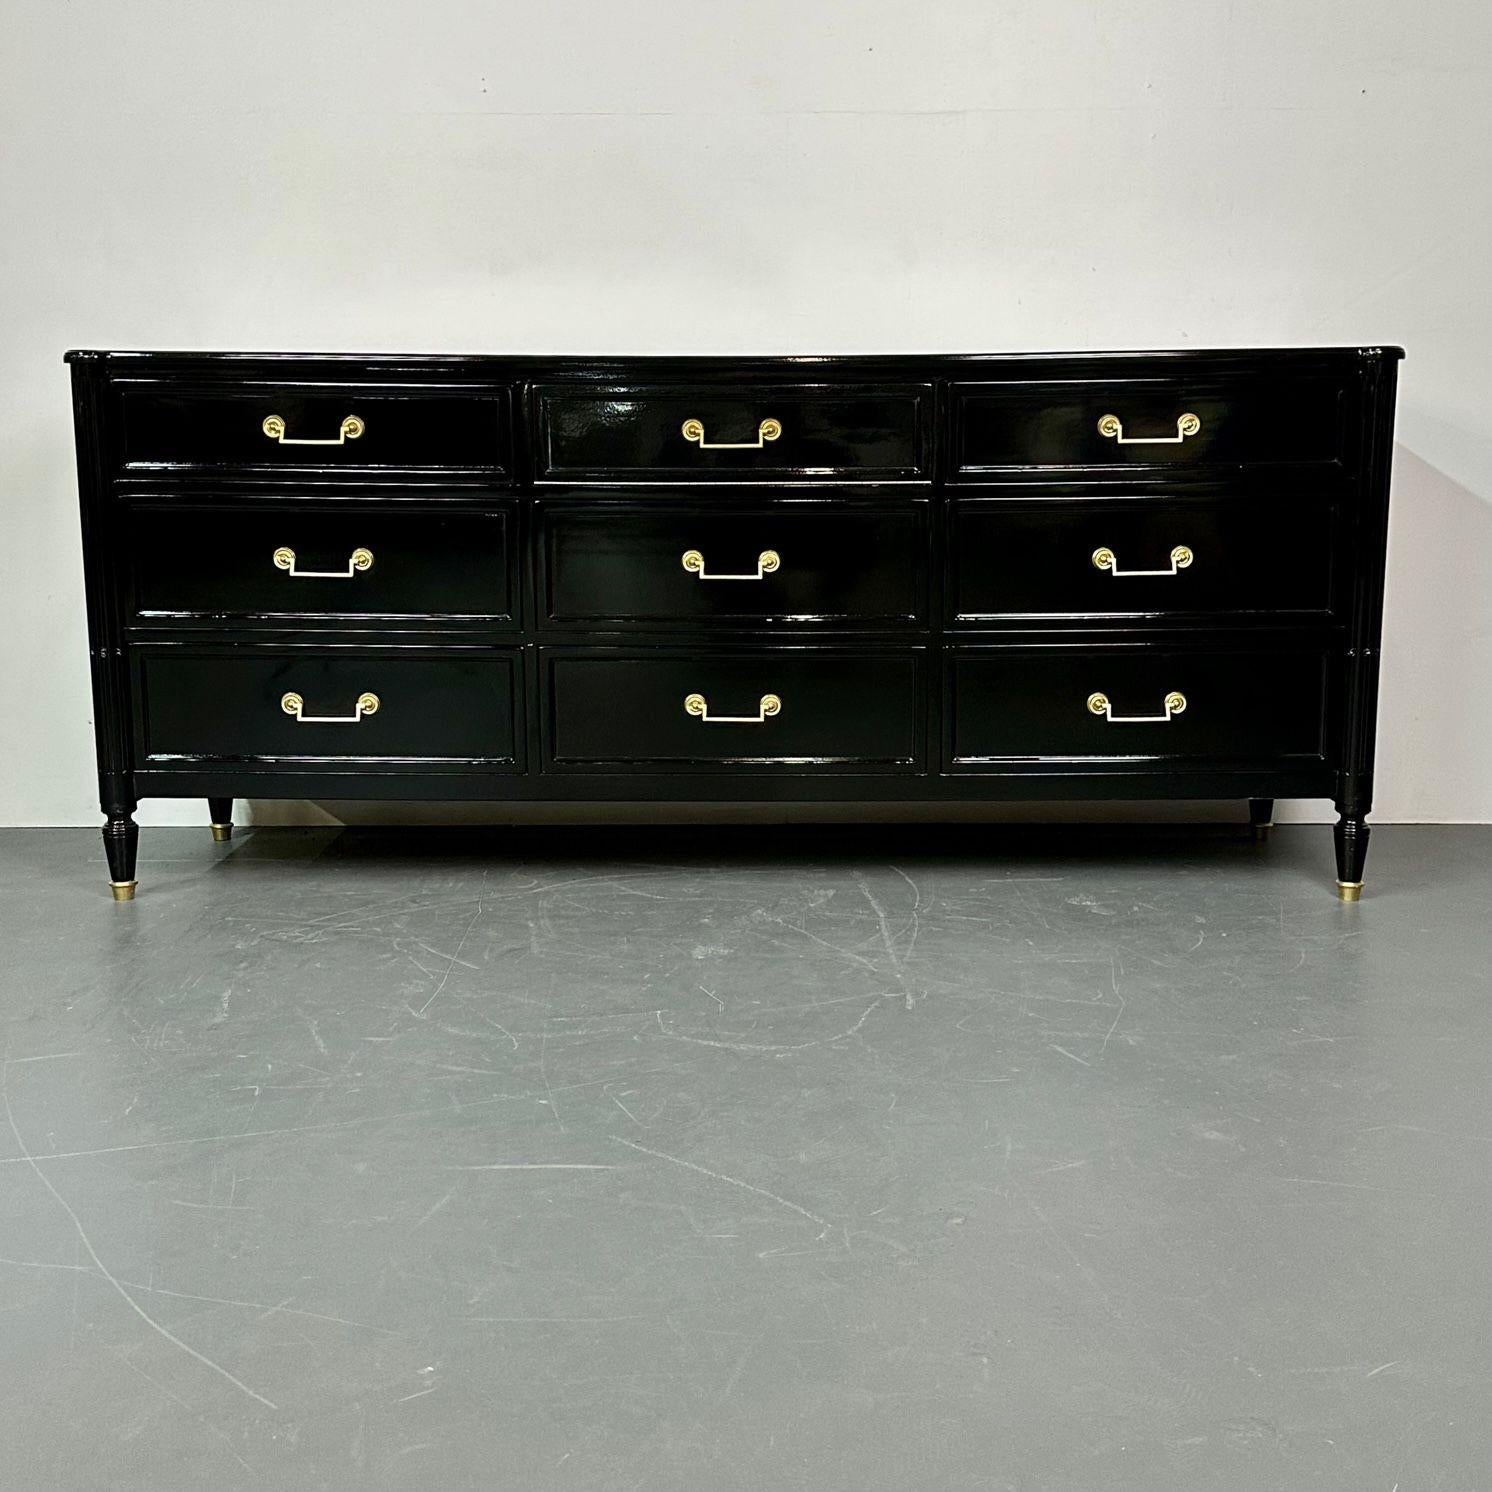 Hollywood Regency ebony lacquer sideboard / commode, Jansen Style, Baker
Custom Baker Hollywood Regency Dressers / Sideboards Jansen Style Ebony Lacquered
A fine Baker Furniture Company by Milling Road Dresser or Sideboard in the Hollywood Regency